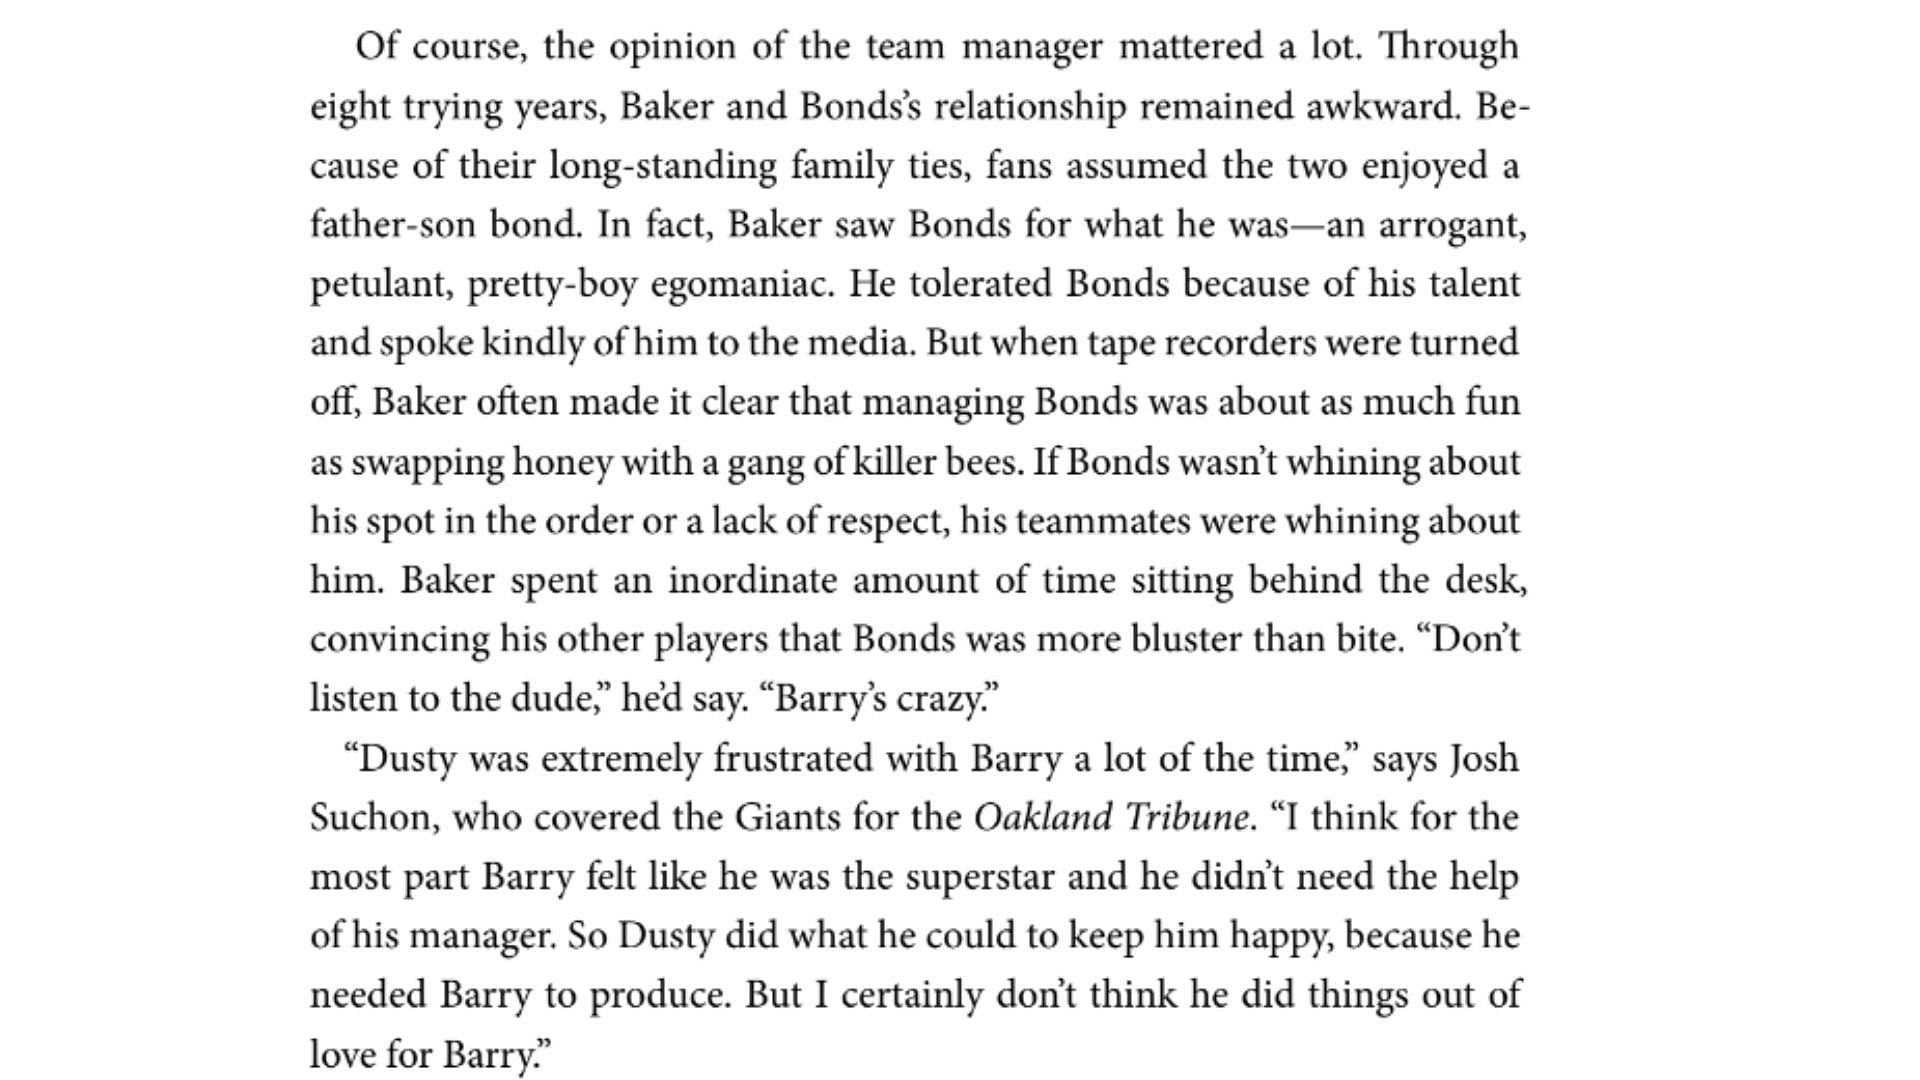 An excerpt from the 2006 book, &quot;Love Me, Hate Me: Barry Bonds and the making of an Antihero.&quot;